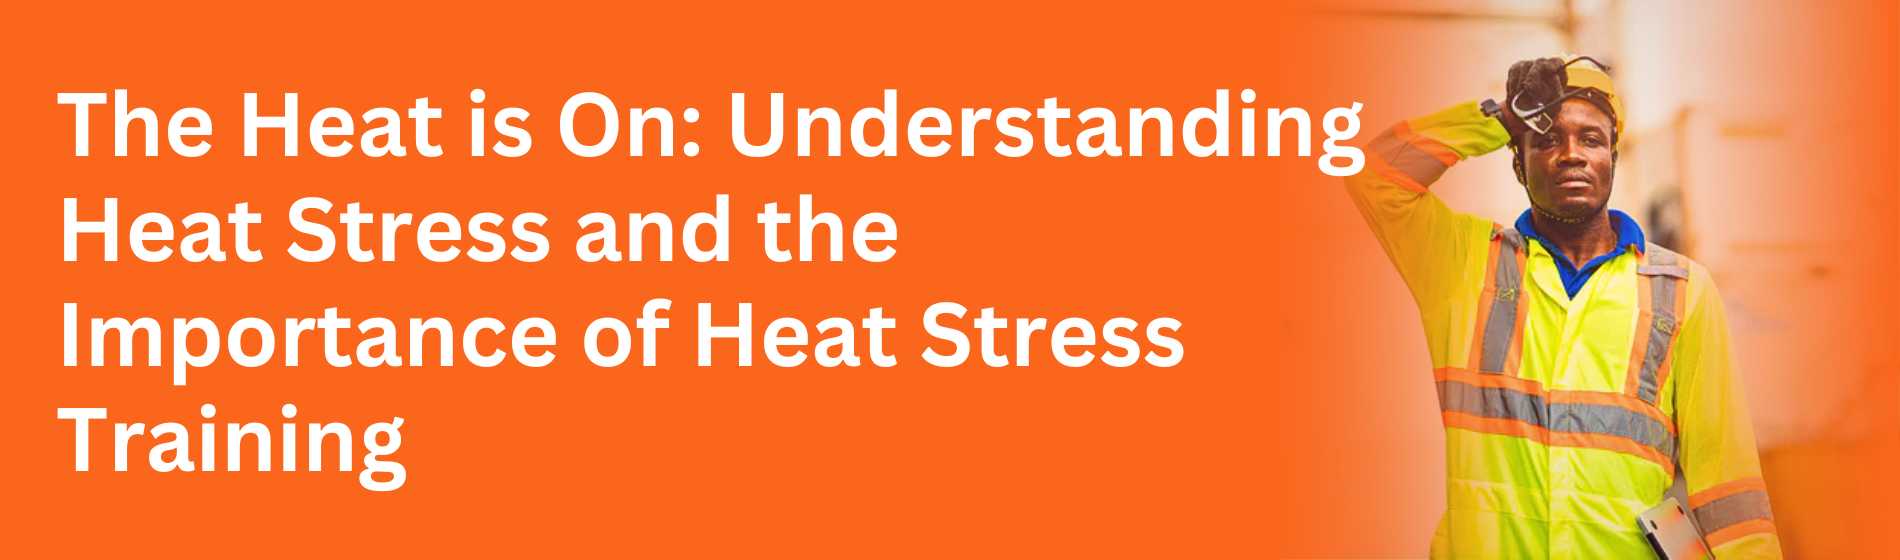 Understanding Heat Stress and the Importance of Heat Stress Training